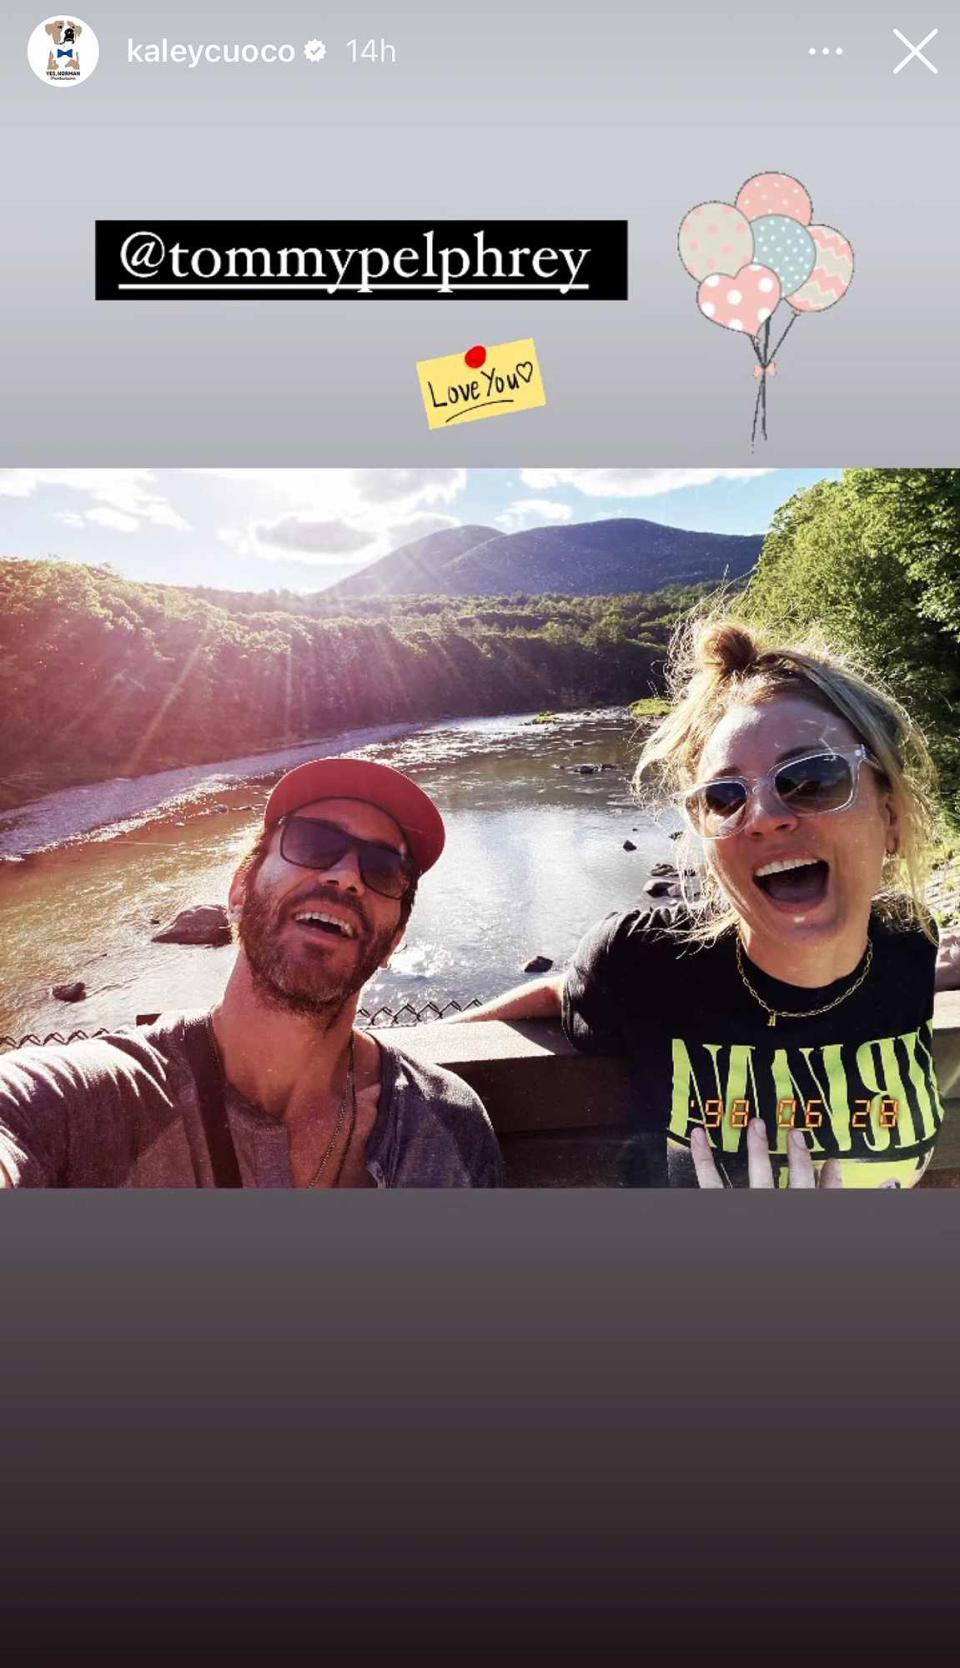 Kaley Cuoco Posts Loving Birthday Tribute for Boyfriend Tom Pelphrey: He ‘Saved Me in All the Ways’